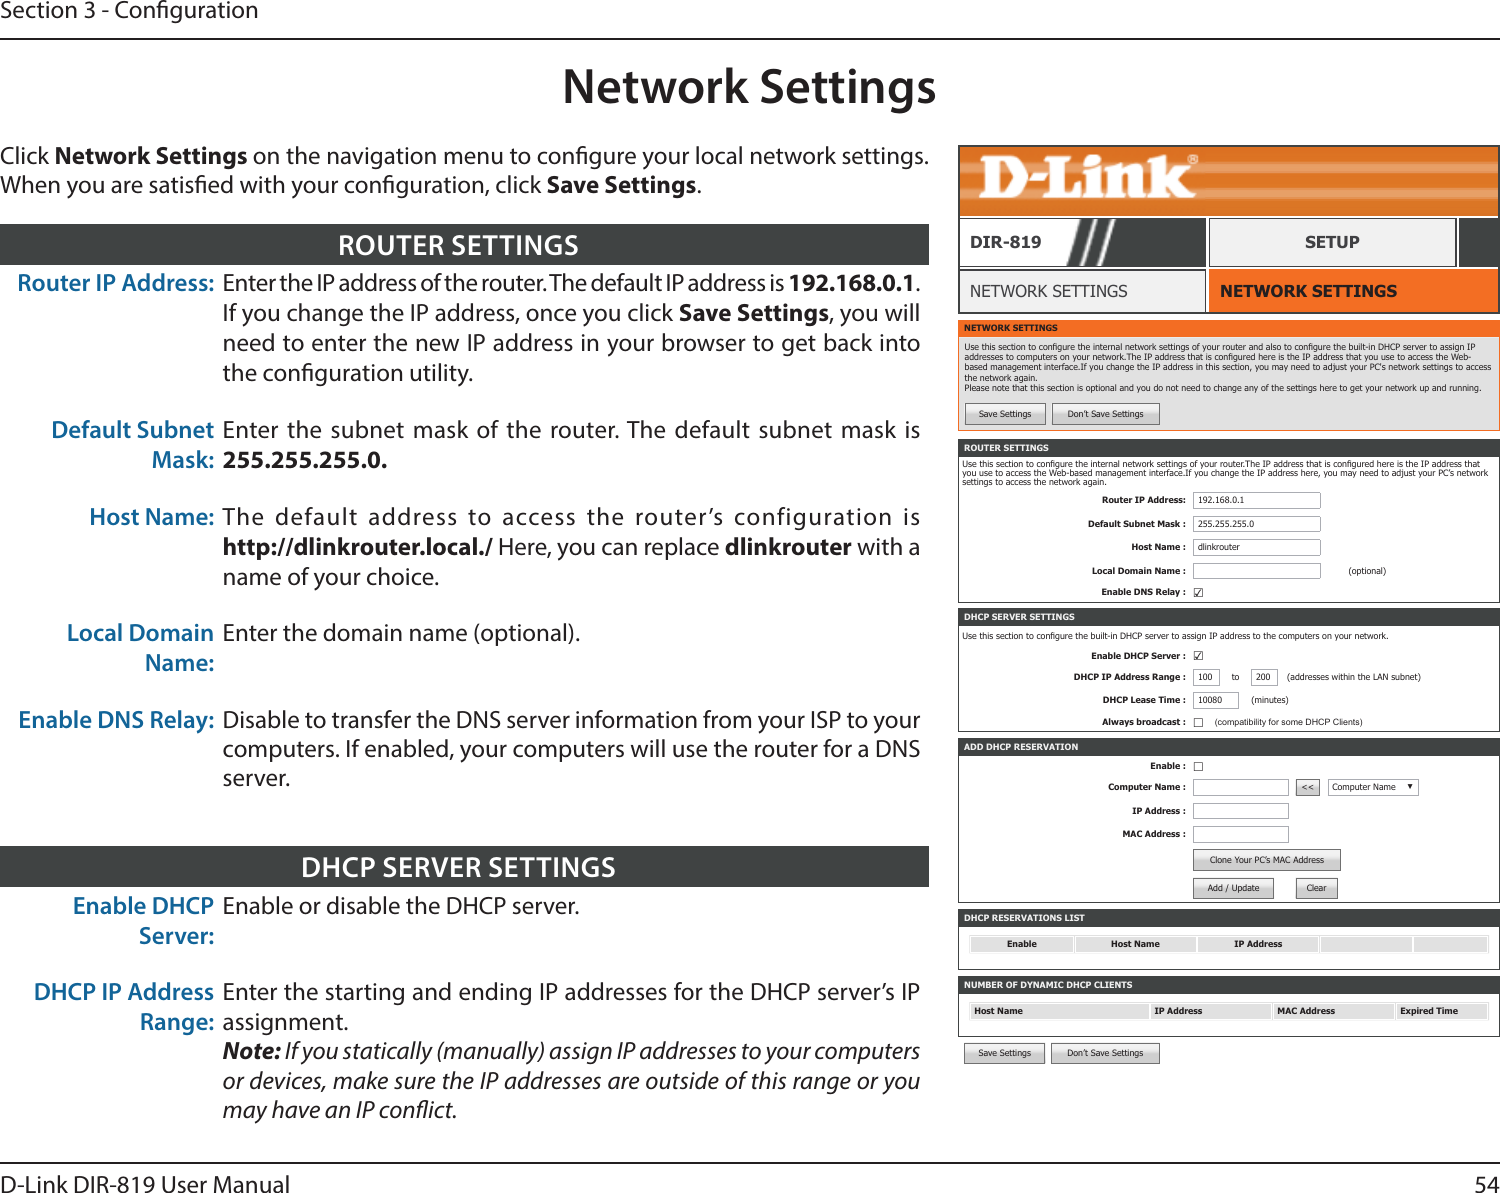 54D-Link DIR-819 User ManualSection 3 - CongurationNetwork SettingsNETWORK SETTINGSNETWORK SETTINGSDIR-819 SETUPClick Network Settings on the navigation menu to congure your local network settings. When you are satised with your conguration, click Save Settings.Router IP Address: Enter the IP address of the router. The default IP address is 192.168.0.1. If you change the IP address, once you click Save Settings, you will need to enter the new IP address in your browser to get back into the conguration utility.Default Subnet Mask:Enter the subnet mask of the router. The default subnet mask is 255.255.255.0.Host Name: The default address to access the router’s configuration is  http://dlinkrouter.local./ Here, you can replace dlinkrouter with a name of your choice.Local Domain Name:Enter the domain name (optional).Enable DNS Relay: Disable to transfer the DNS server information from your ISP to your computers. If enabled, your computers will use the router for a DNS server.ROUTER SETTINGSNETWORK SETTINGSUse this section to congure the internal network settings of your router and also to congure the built-in DHCP server to assign IP addresses to computers on your network.The IP address that is congured here is the IP address that you use to access the Web-based management interface.If you change the IP address in this section, you may need to adjust your PC&apos;s network settings to access the network again. Please note that this section is optional and you do not need to change any of the settings here to get your network up and running.Save Settings Don’t Save SettingsDHCP RESERVATIONS LISTEnable Host Name IP AddressNUMBER OF DYNAMIC DHCP CLIENTSHost Name IP Address MAC Address Expired TimeROUTER SETTINGSUse this section to congure the internal network settings of your router.The IP address that is congured here is the IP address that you use to access the Web-based management interface.If you change the IP address here, you may need to adjust your PC’s network settings to access the network again.Router IP Address: 192.168.0.1Default Subnet Mask : 255.255.255.0Host Name : dlinkrouterLocal Domain Name : (optional)Enable DNS Relay : ☑ADD DHCP RESERVATIONEnable : ☐Computer Name : &lt;&lt; Computer Name ▼IP Address :MAC Address :Clone Your PC’s MAC AddressAdd / Update ClearDHCP SERVER SETTINGSUse this section to congure the built-in DHCP server to assign IP address to the computers on your network.Enable DHCP Server : ☑DHCP IP Address Range : 100 to 200 (addresses within the LAN subnet)DHCP Lease Time : 10080 (minutes)Always broadcast : ☐(compatibility for some DHCP Clients)Save Settings Don’t Save SettingsEnable DHCP Server:Enable or disable the DHCP server.DHCP IP Address Range:Enter the starting and ending IP addresses for the DHCP server’s IP assignment.Note: If you statically (manually) assign IP addresses to your computers or devices, make sure the IP addresses are outside of this range or you may have an IP conict.DHCP SERVER SETTINGS